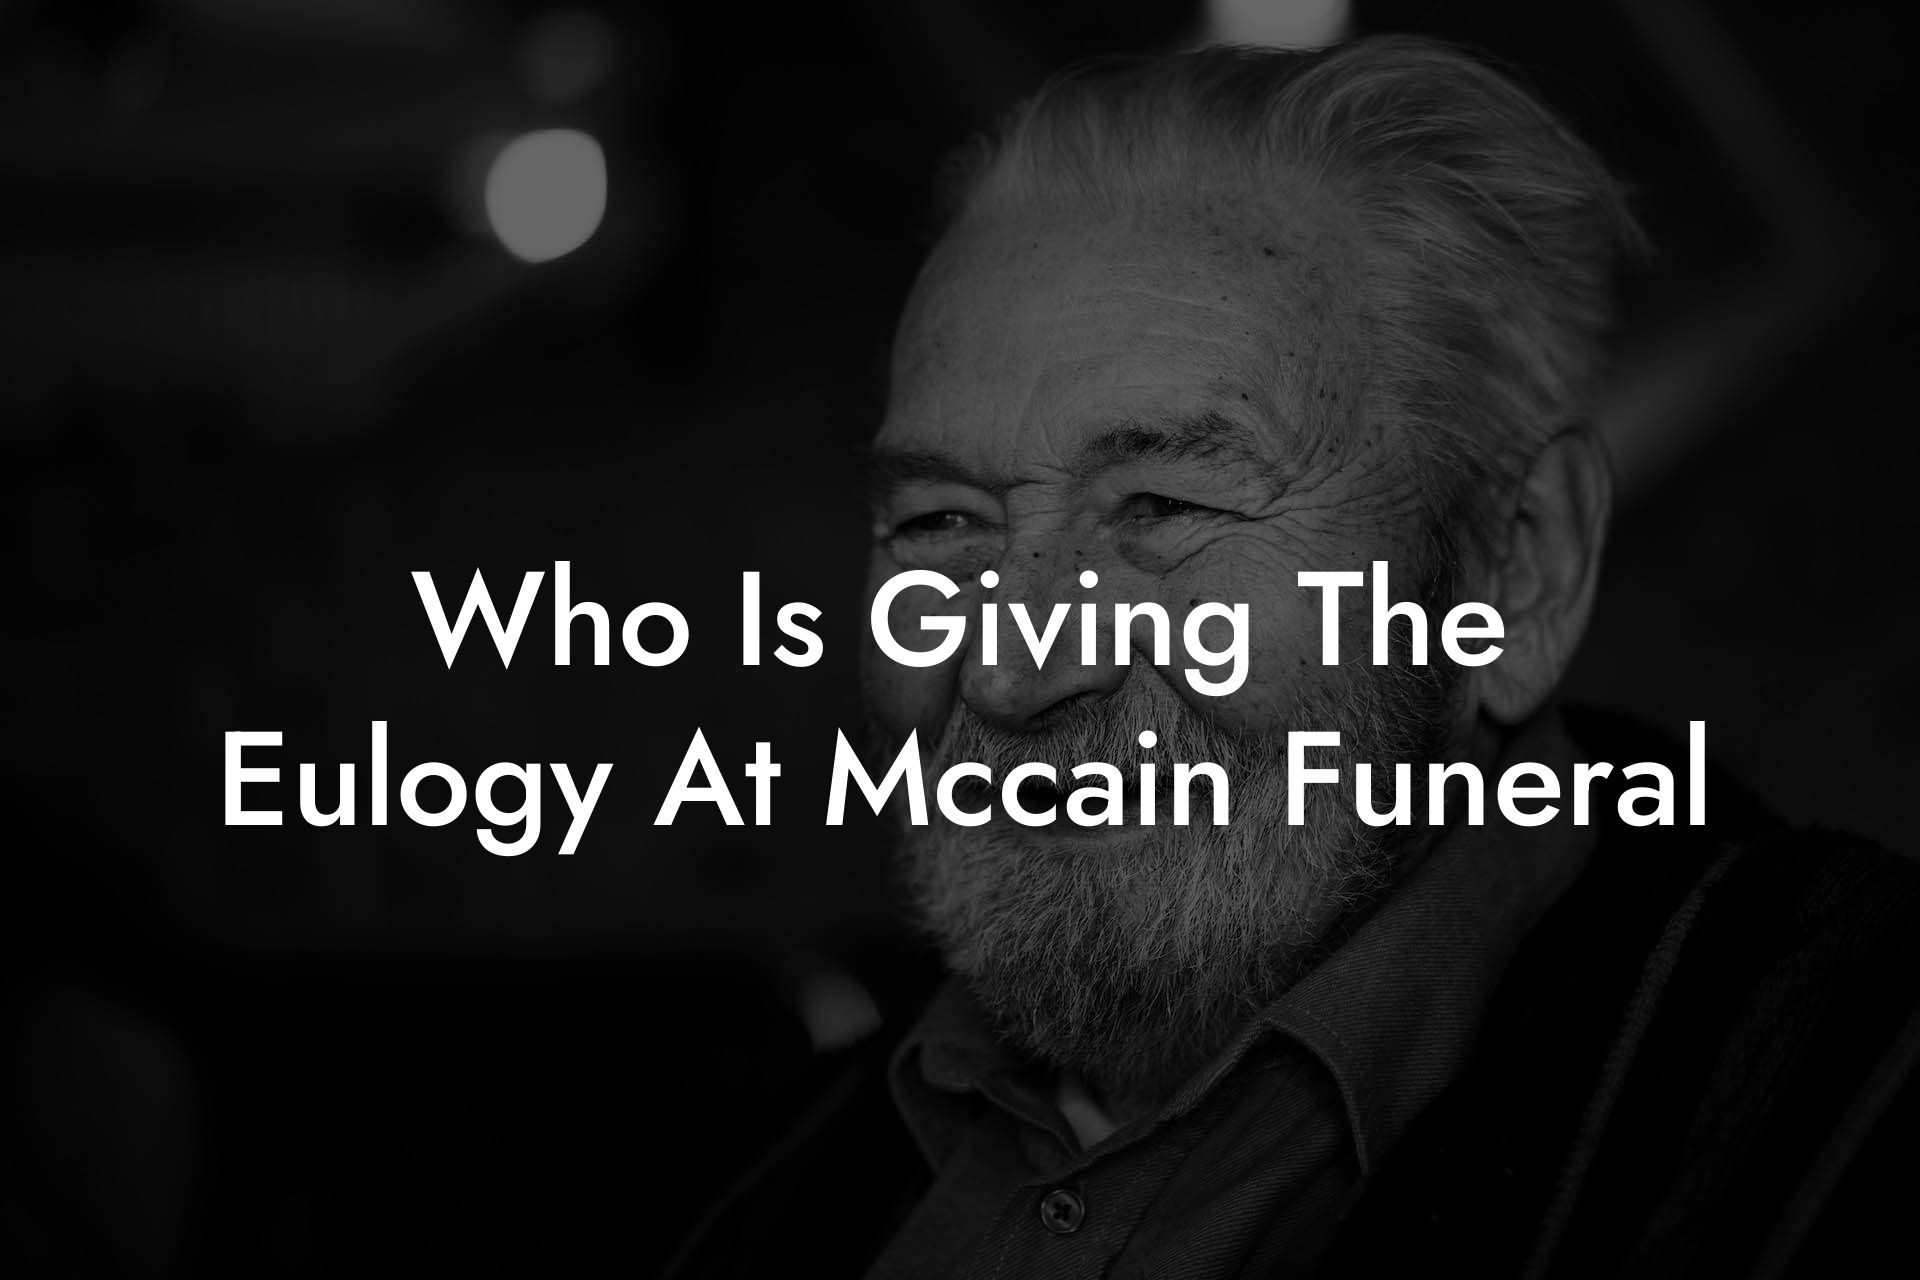 Who Is Giving The Eulogy At Mccain Funeral